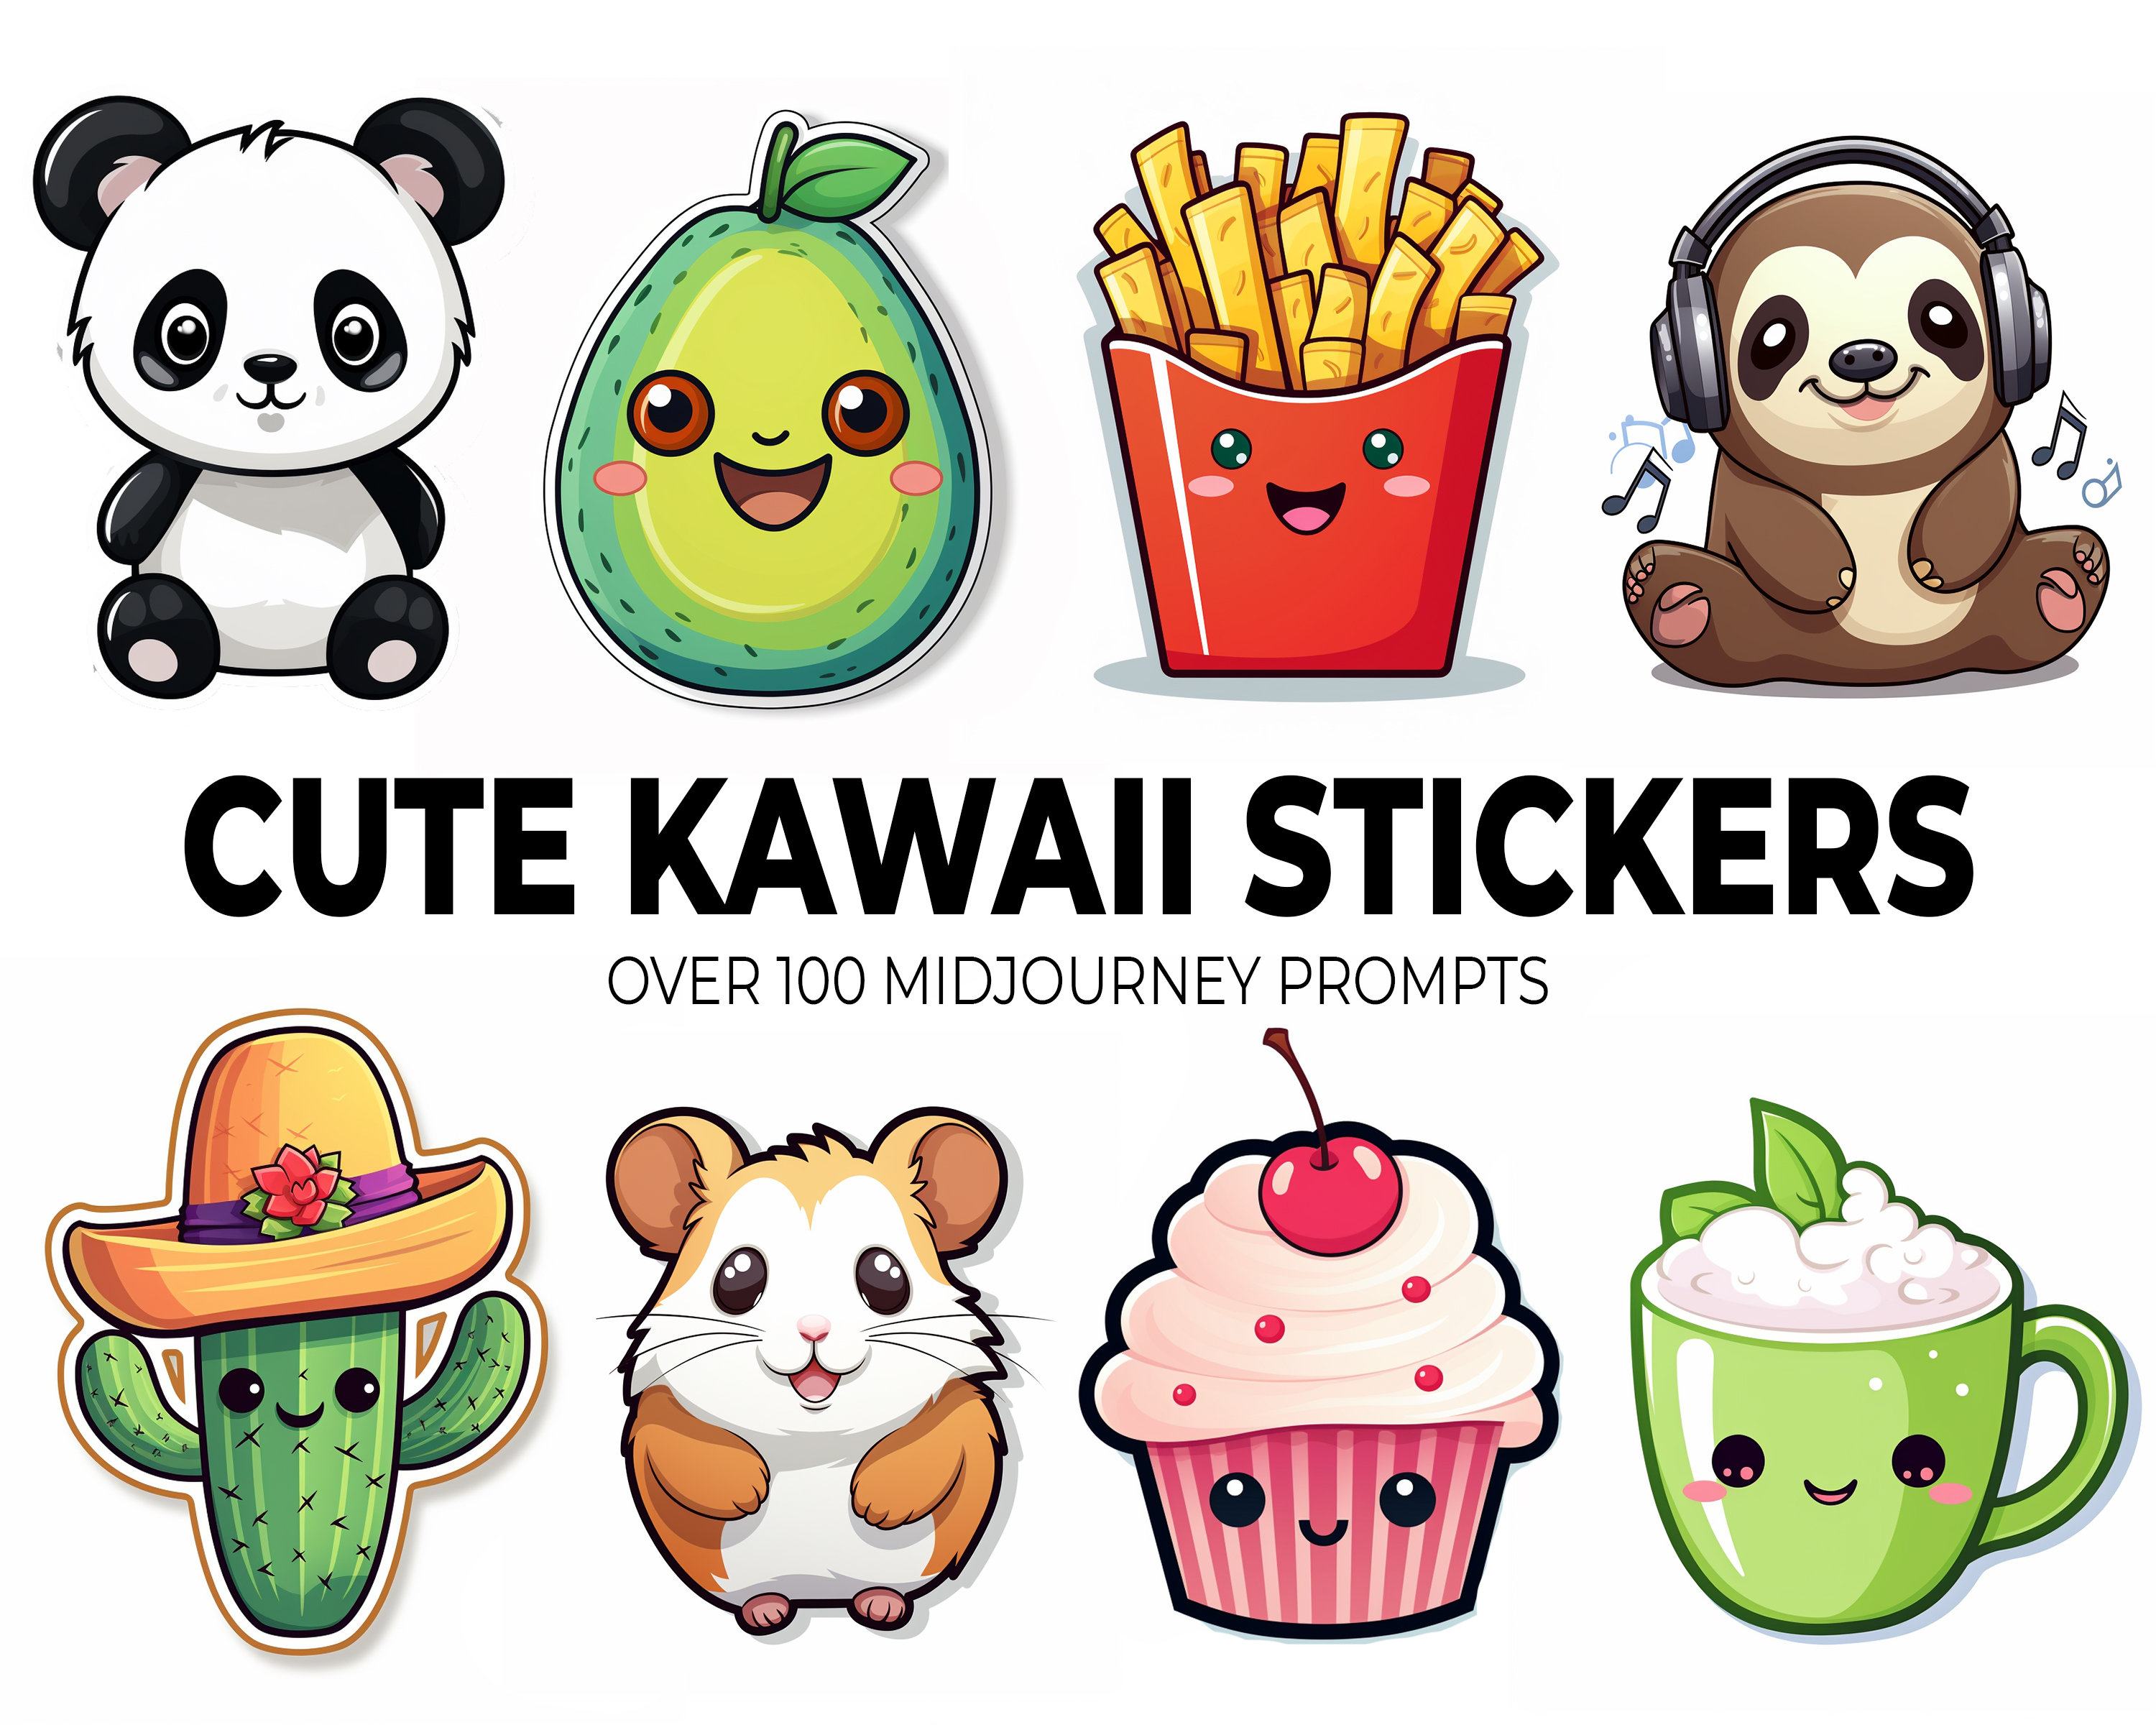 Prompts for Cute Kawaii Sticker Graphic by Milano Creative